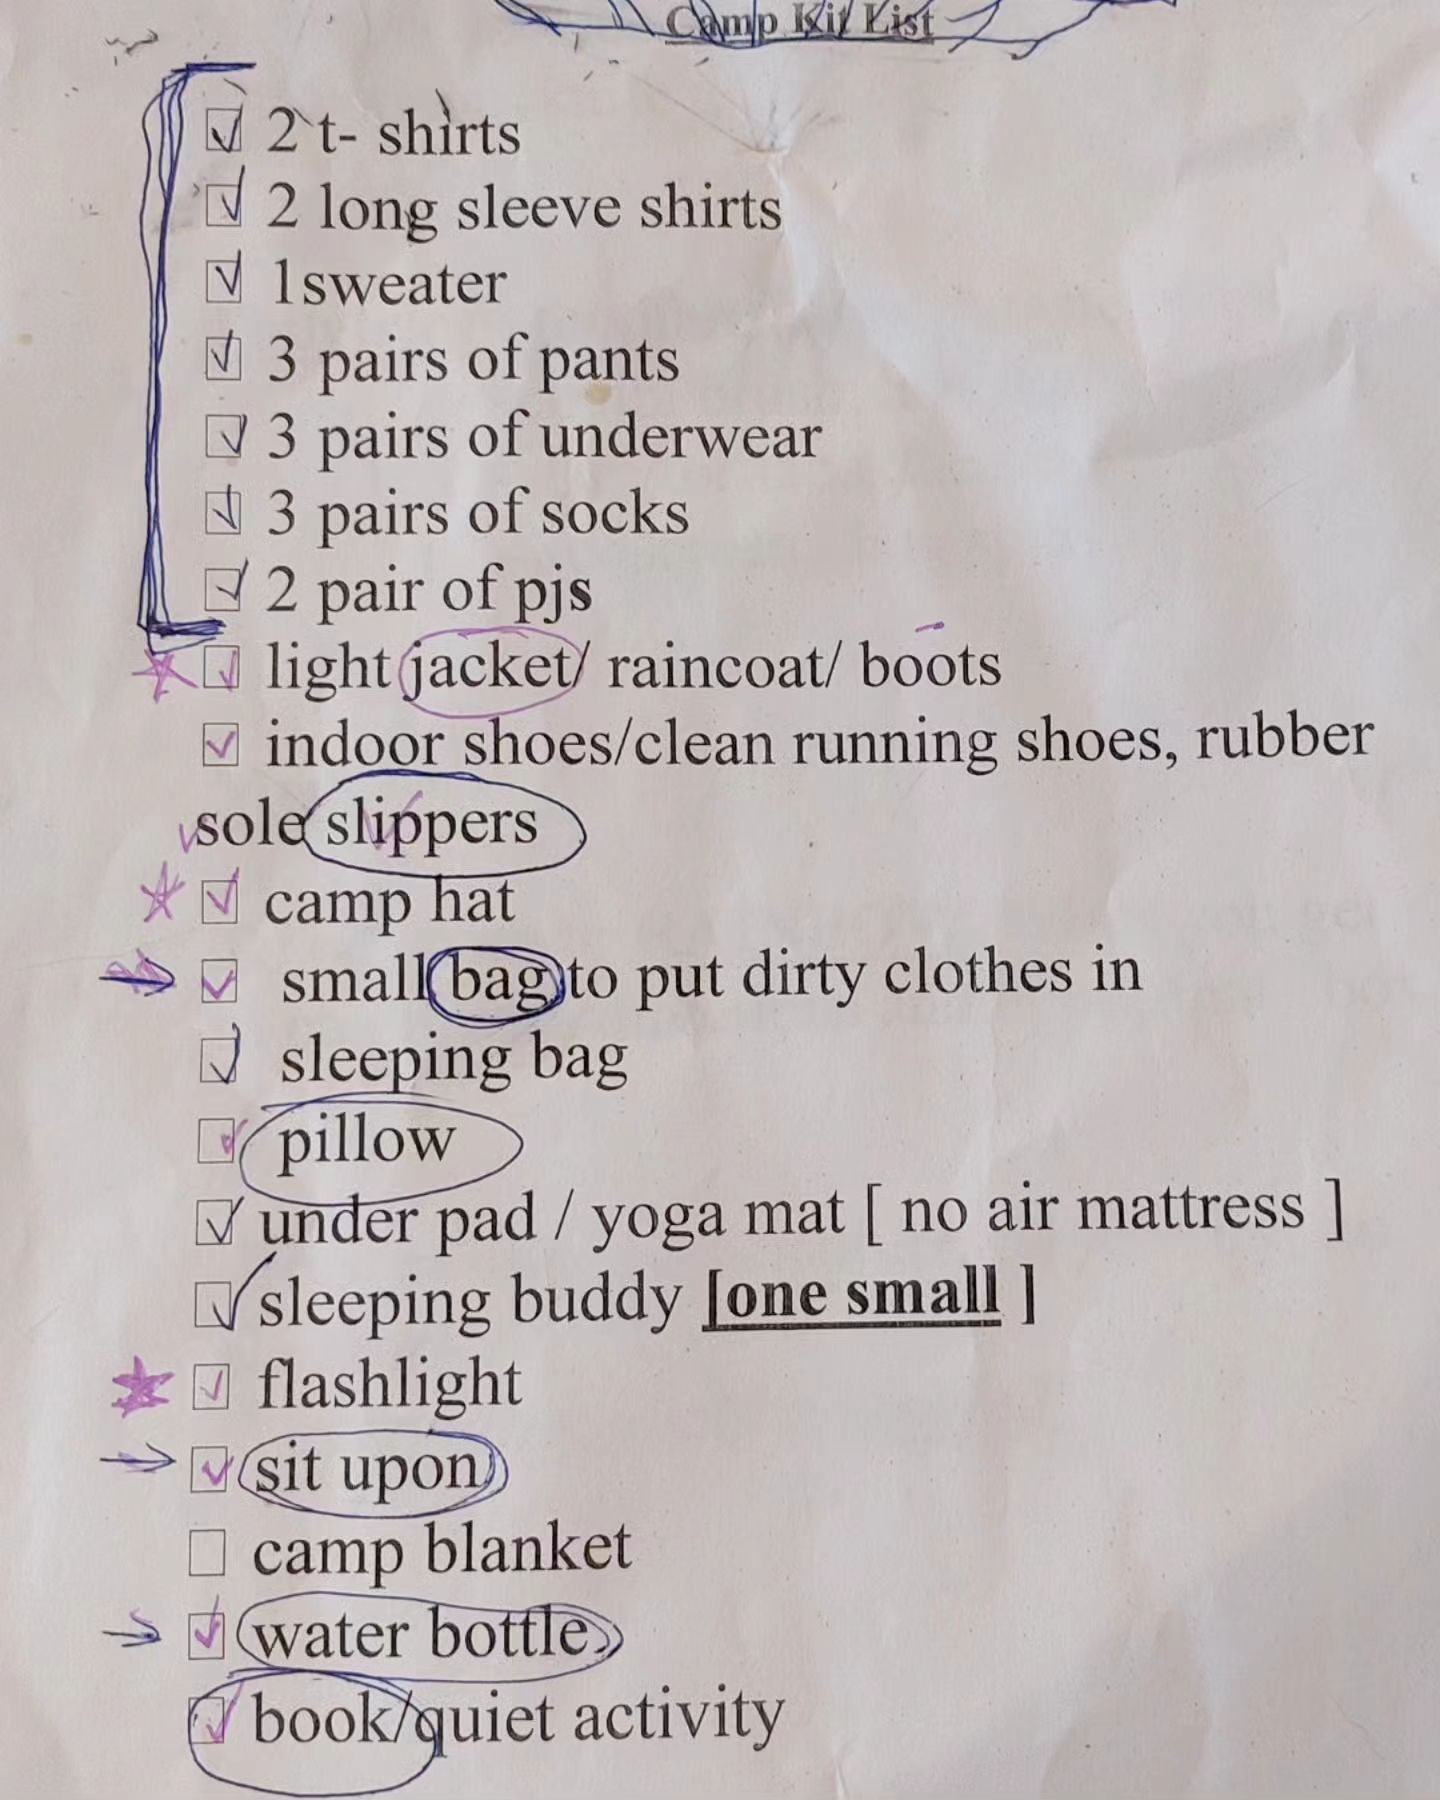 I asked my daughter to follow the list to pack for her embers sleepover camp this weekend. 

Paper in hand, she wandered off to pack. 15 minutes later, she hadn't packed a single thing. Not one.

Instead of getting frustrated, I got curious: what was